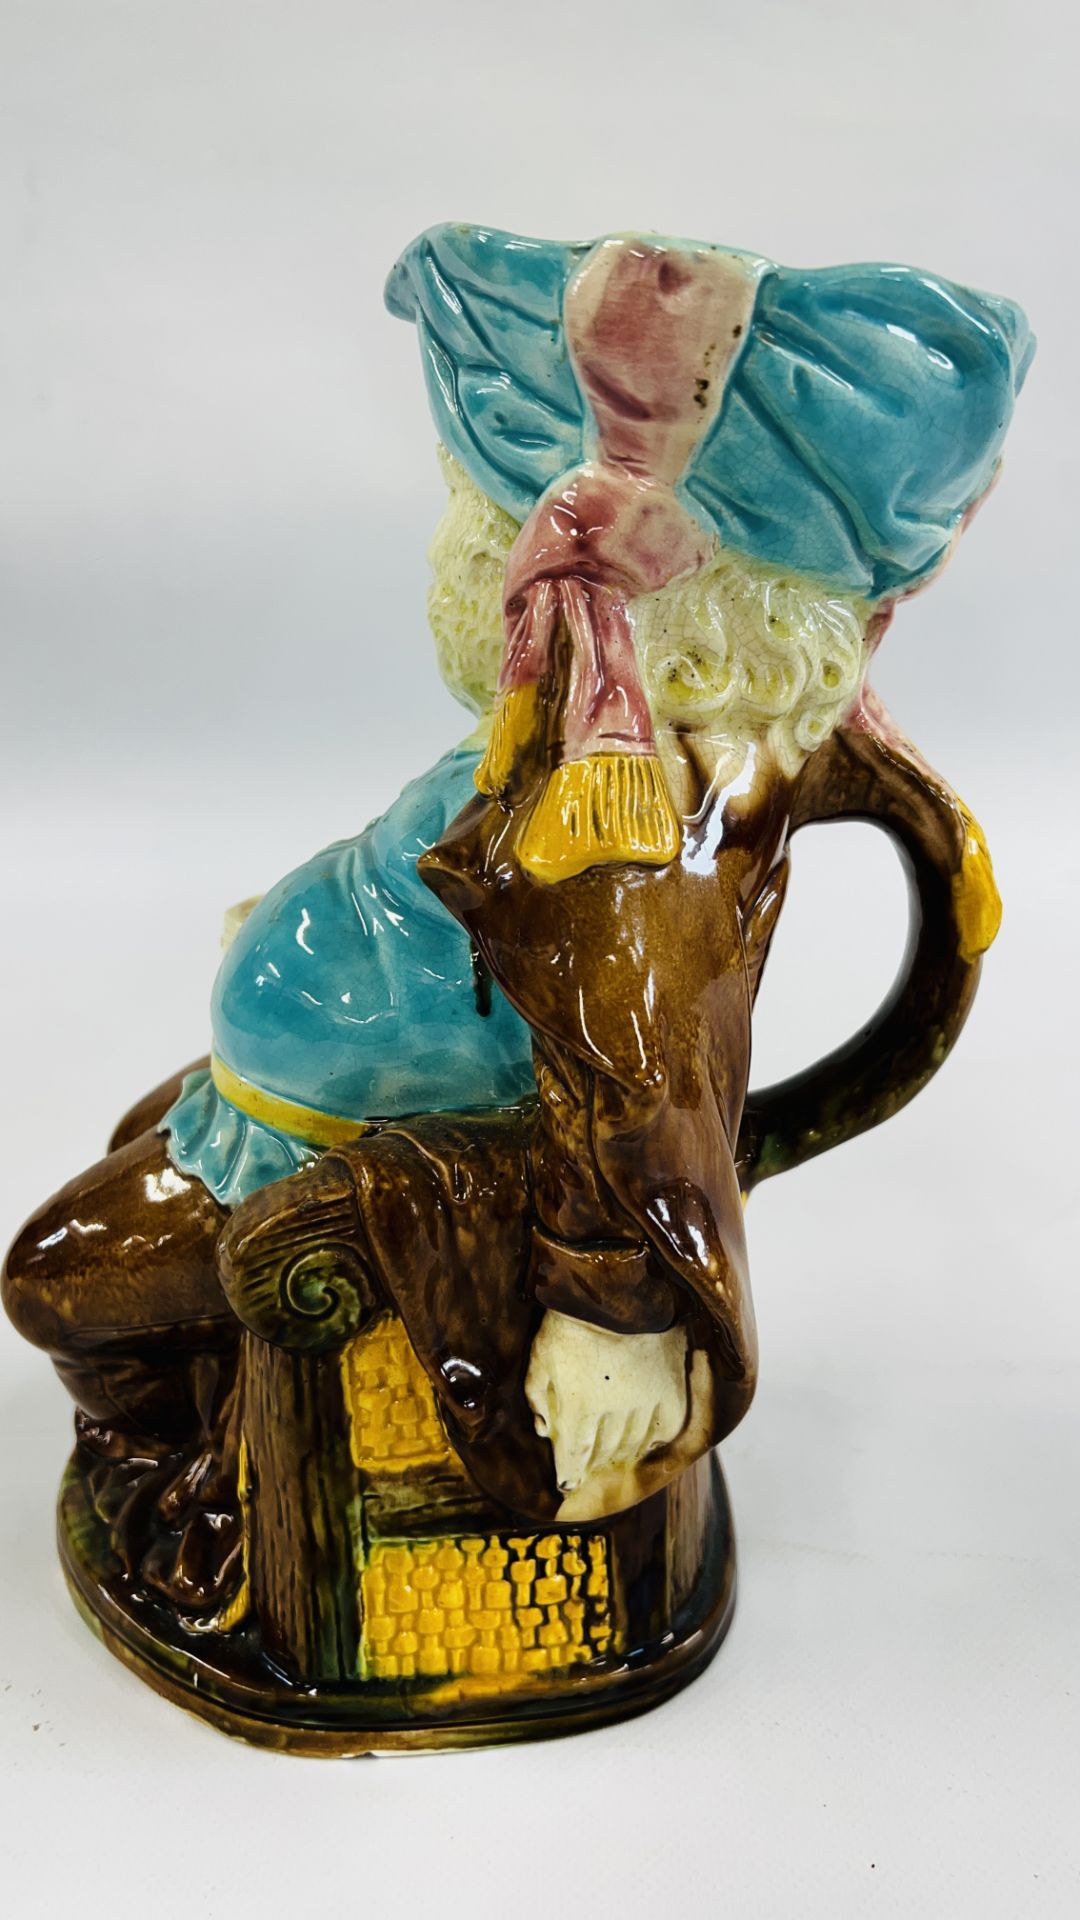 A LARGE GLAZED CHARACTER JUG IN THE MAJOLICA STYLE H 26CM. - Image 7 of 8